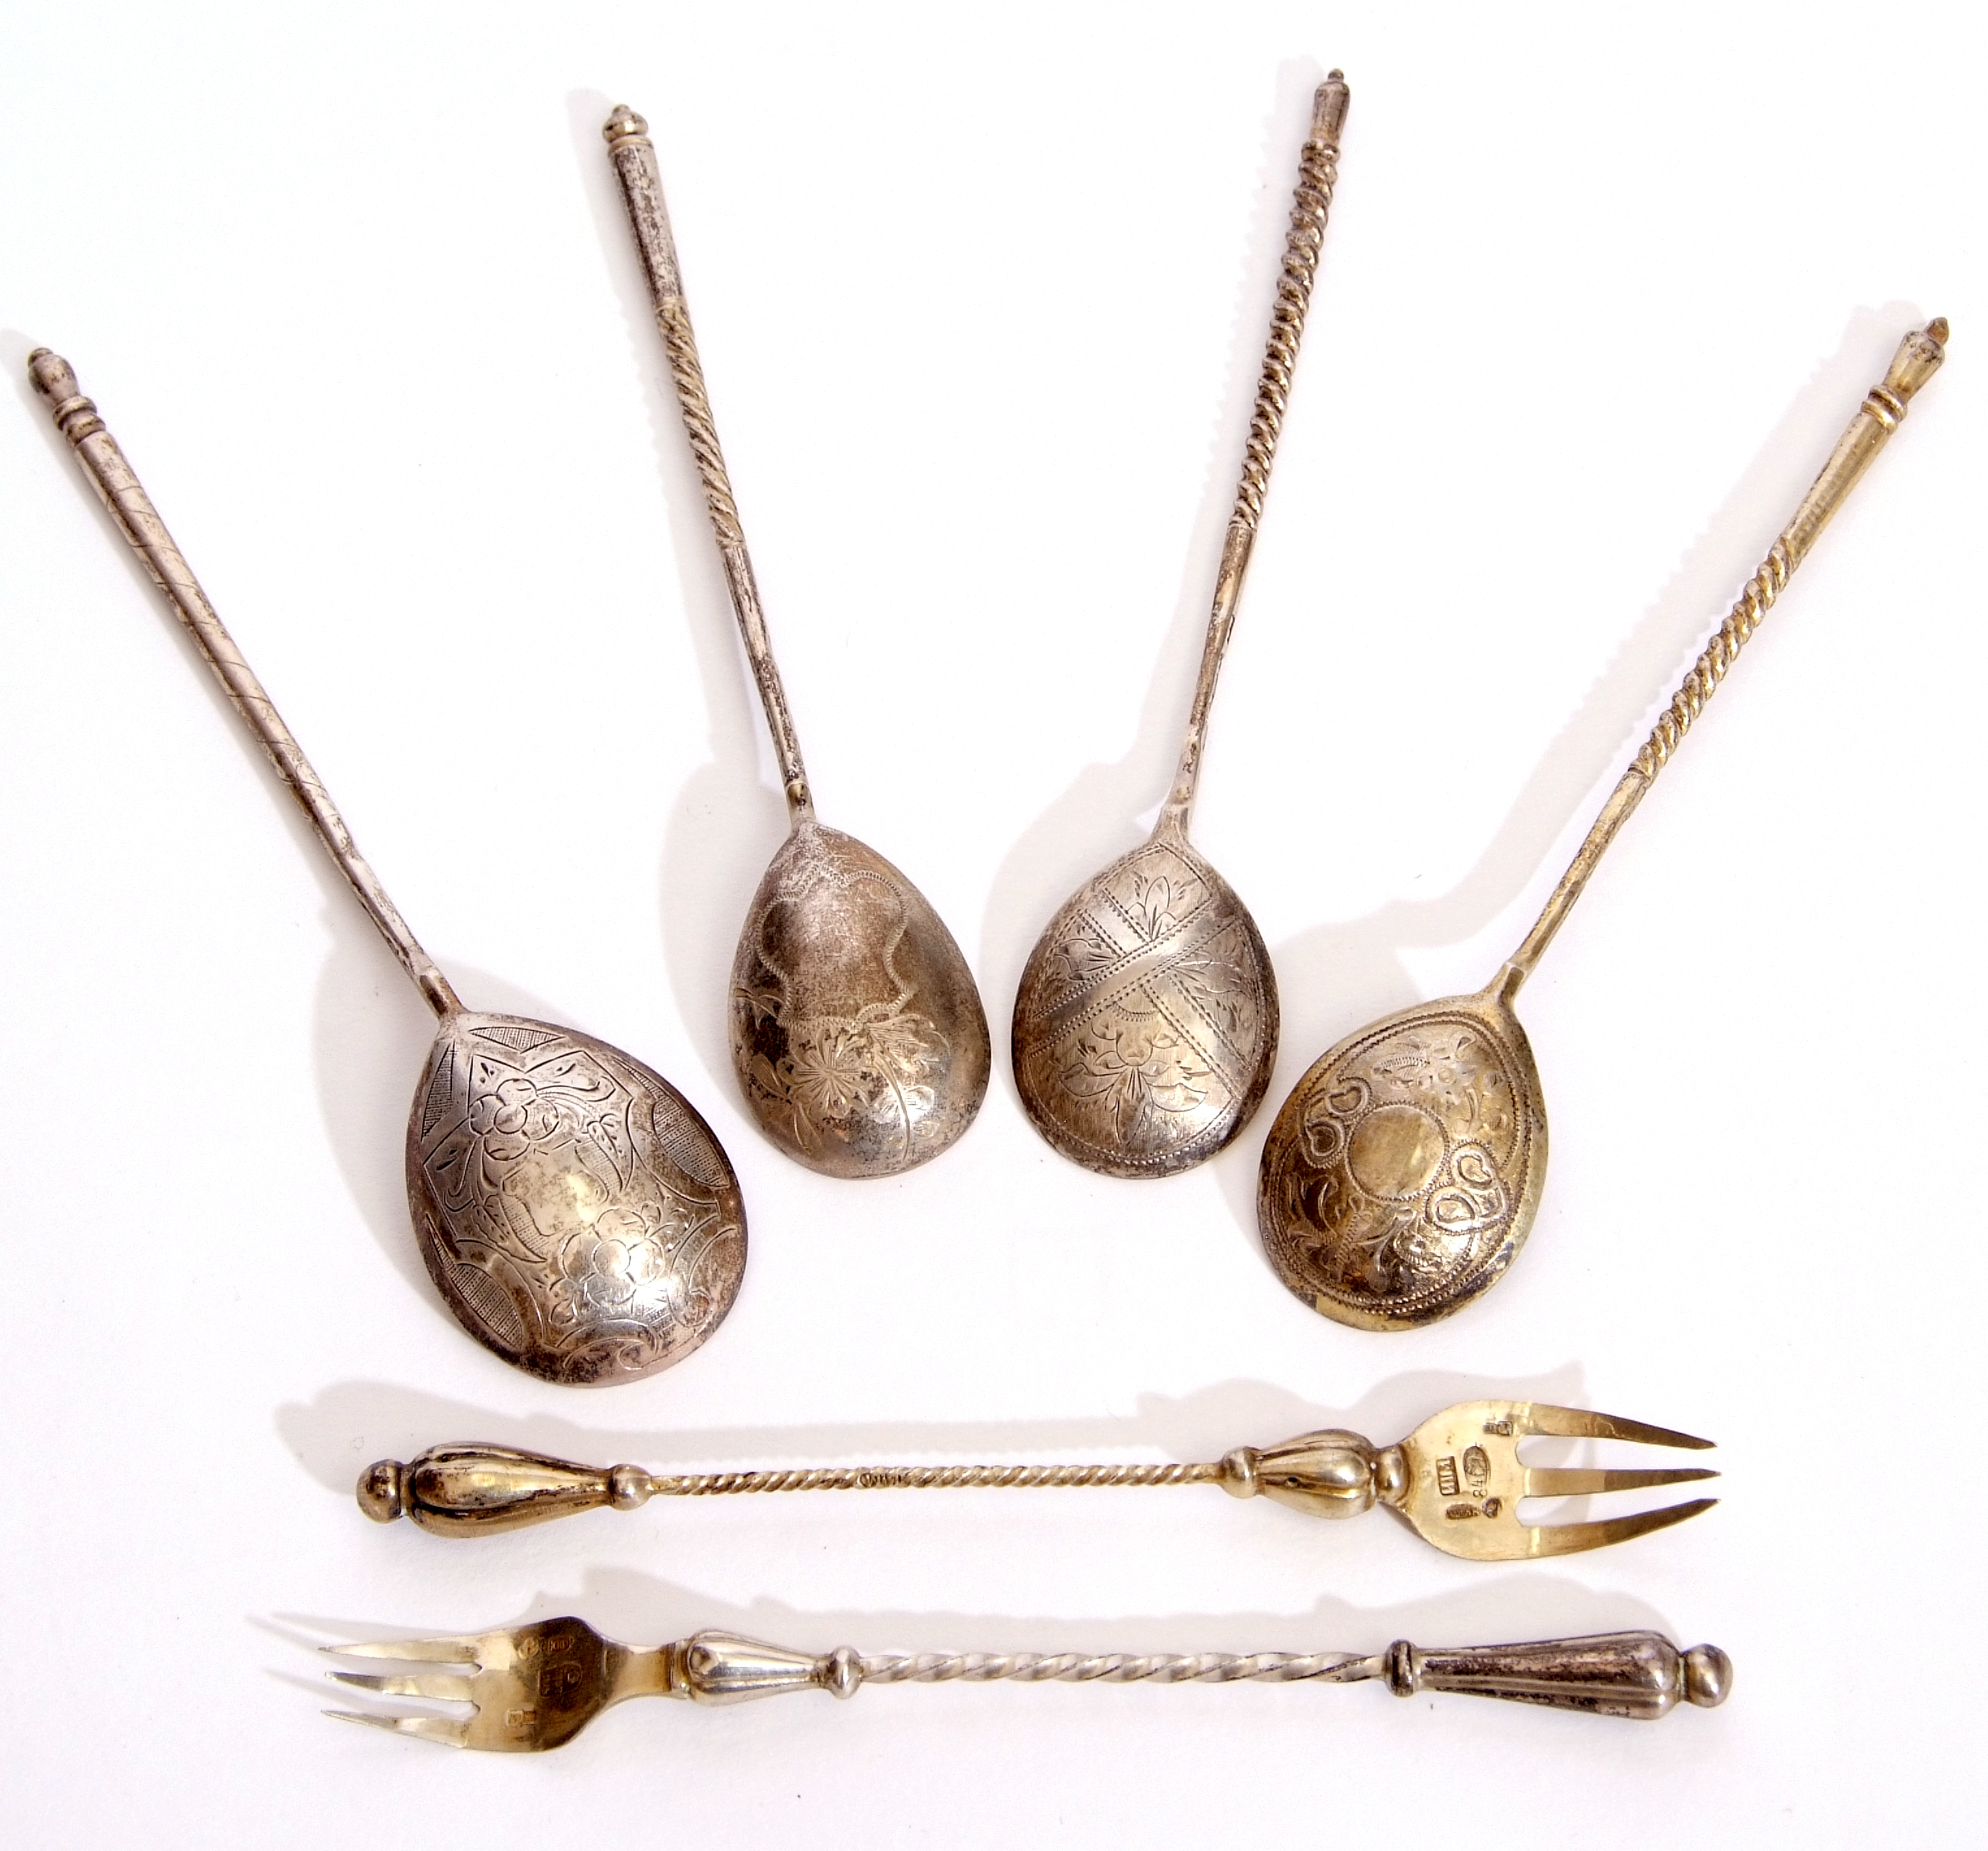 Group of 19th century Russian small silver gilt flatware items including four spoons with egg shaped